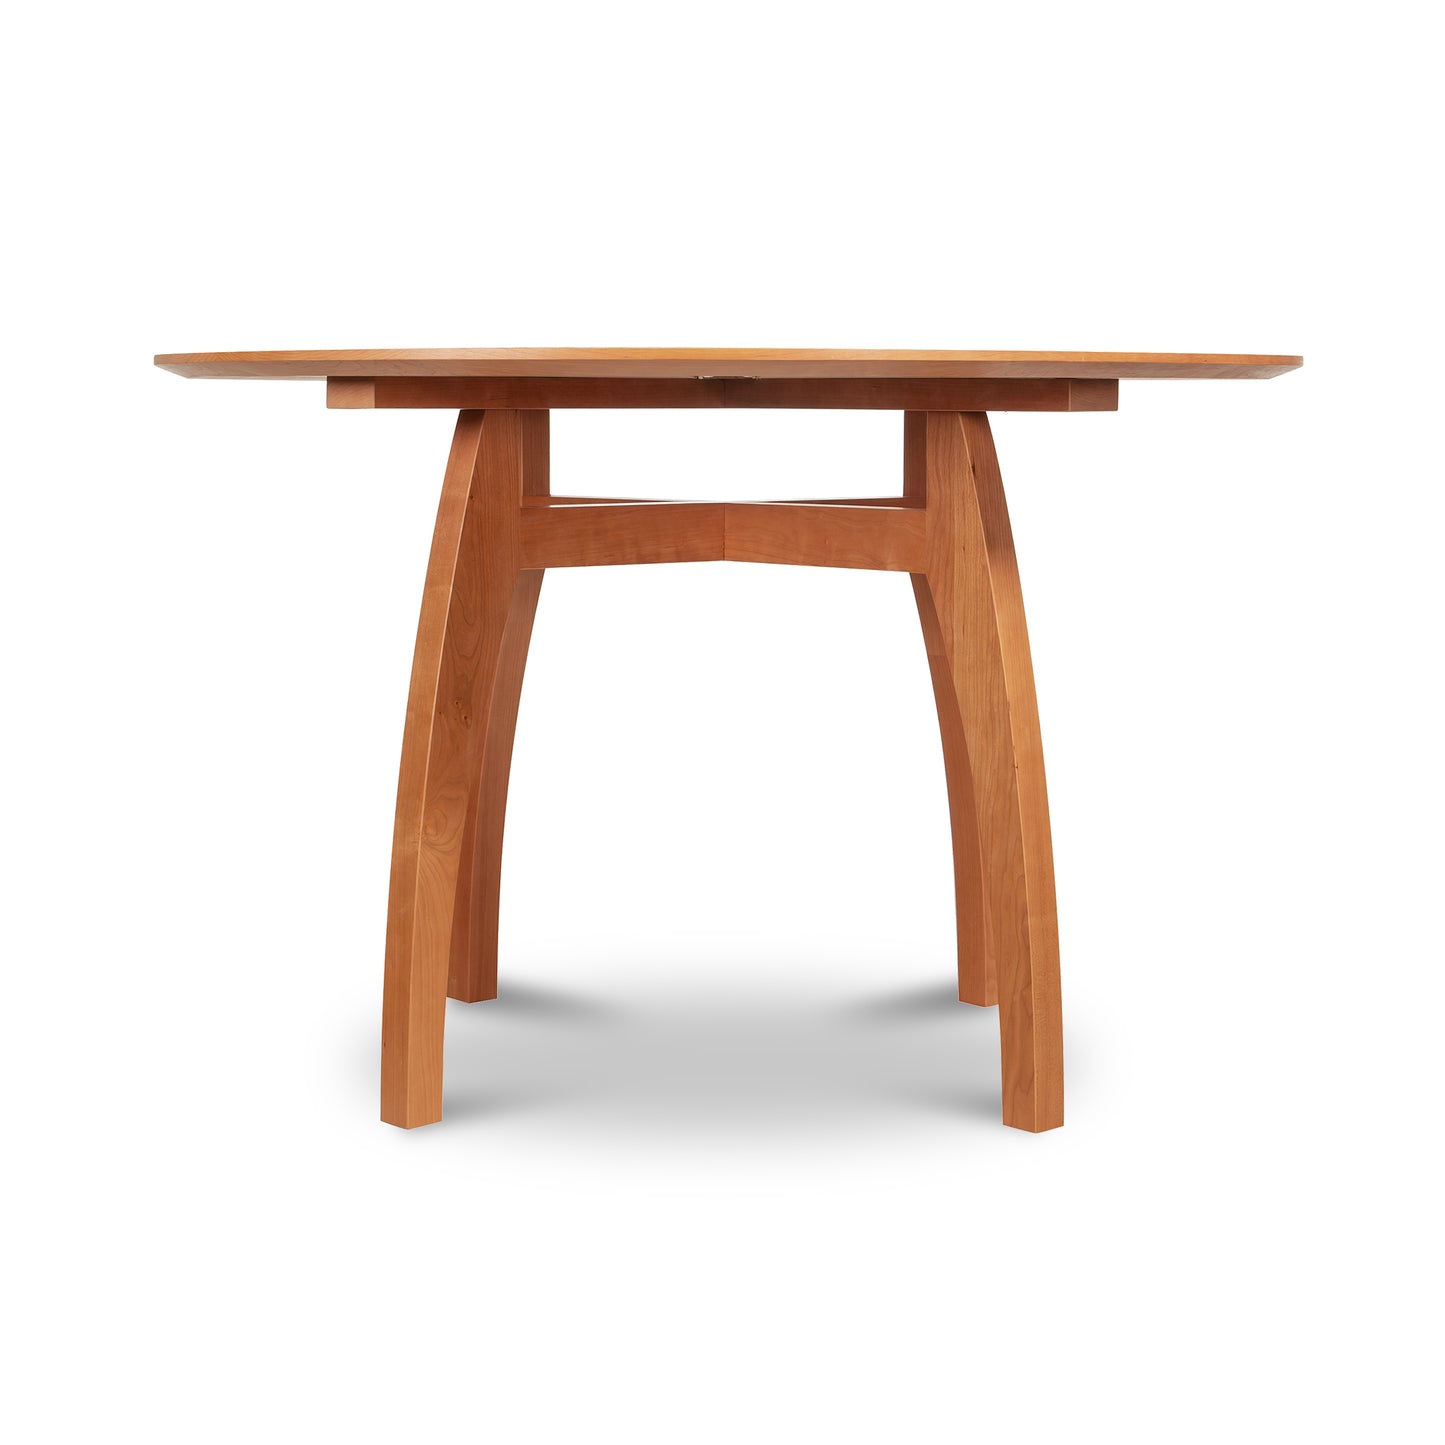 An organic Vermont Modern Round Solid Top Pedestal Table with a wooden base, handmade by Lyndon Furniture in Vermont.